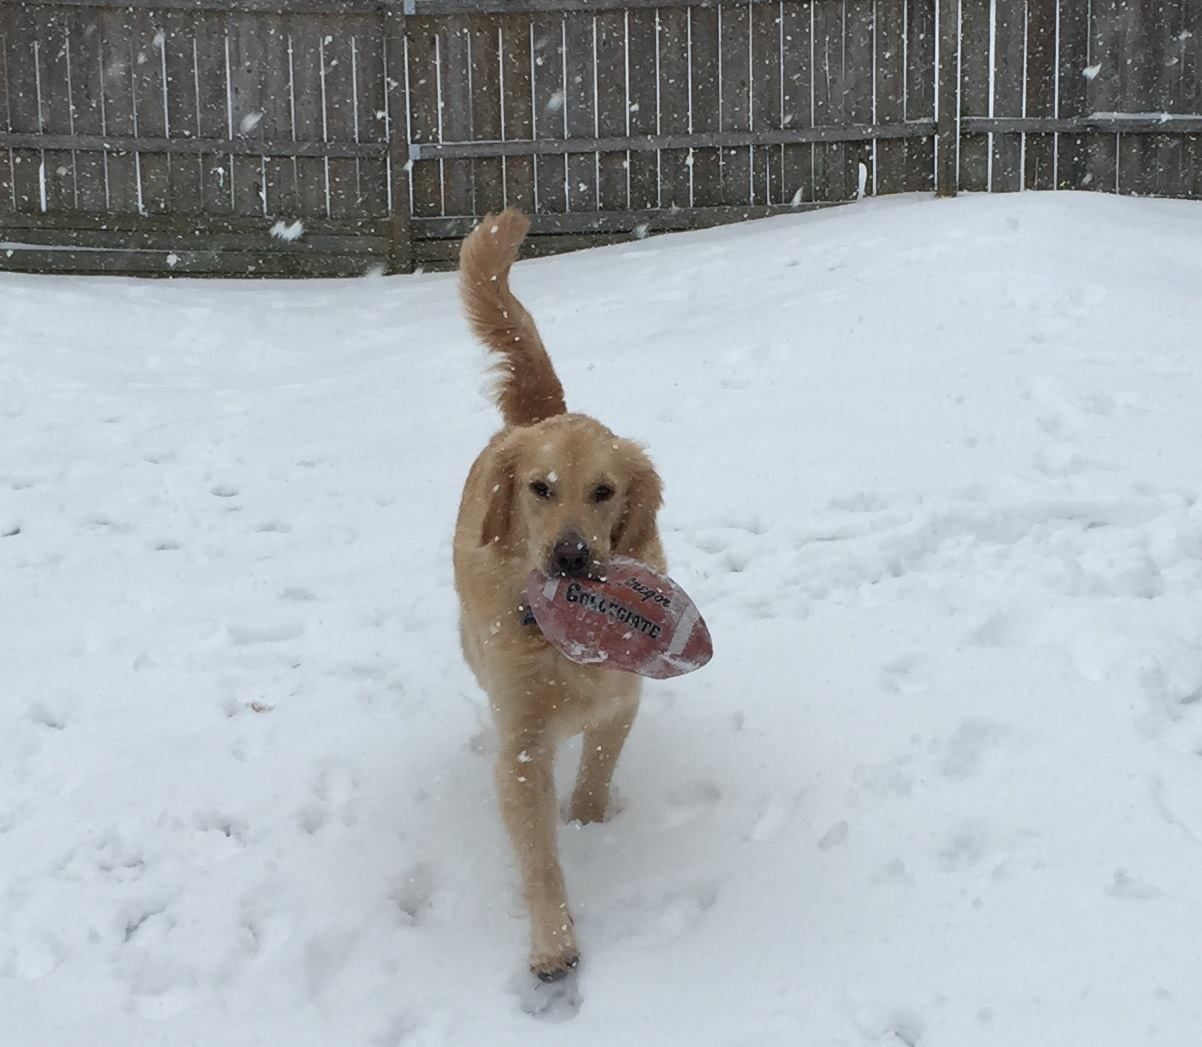 snow games football with golden retriever outdoors winter with fence in background